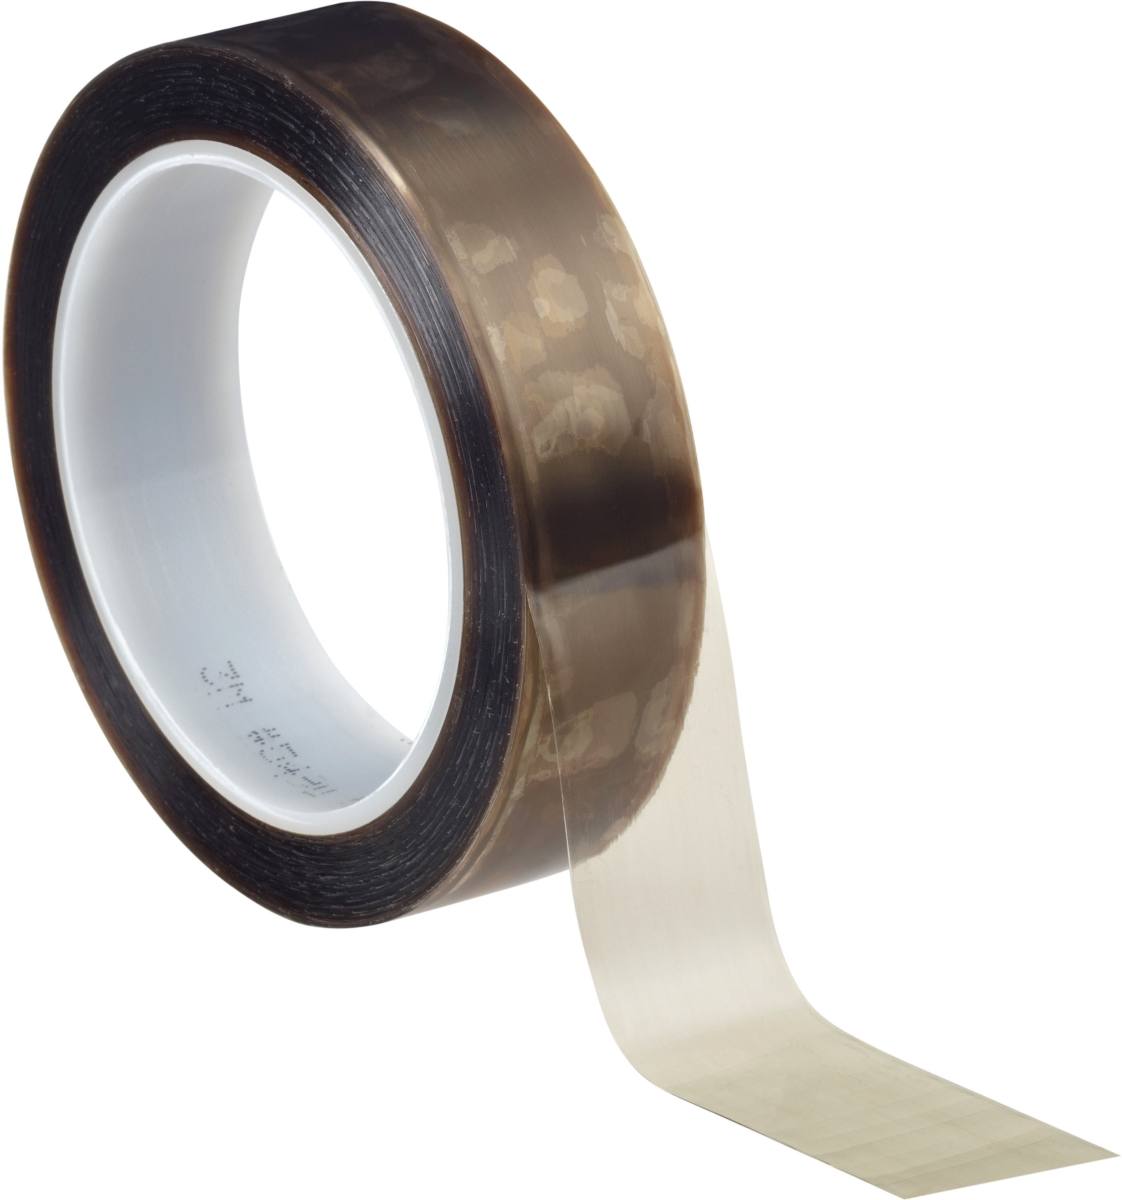 3M 5490 PTFE extruded film adhesive tape 12.7mmx33m, 0.09mm, silicone